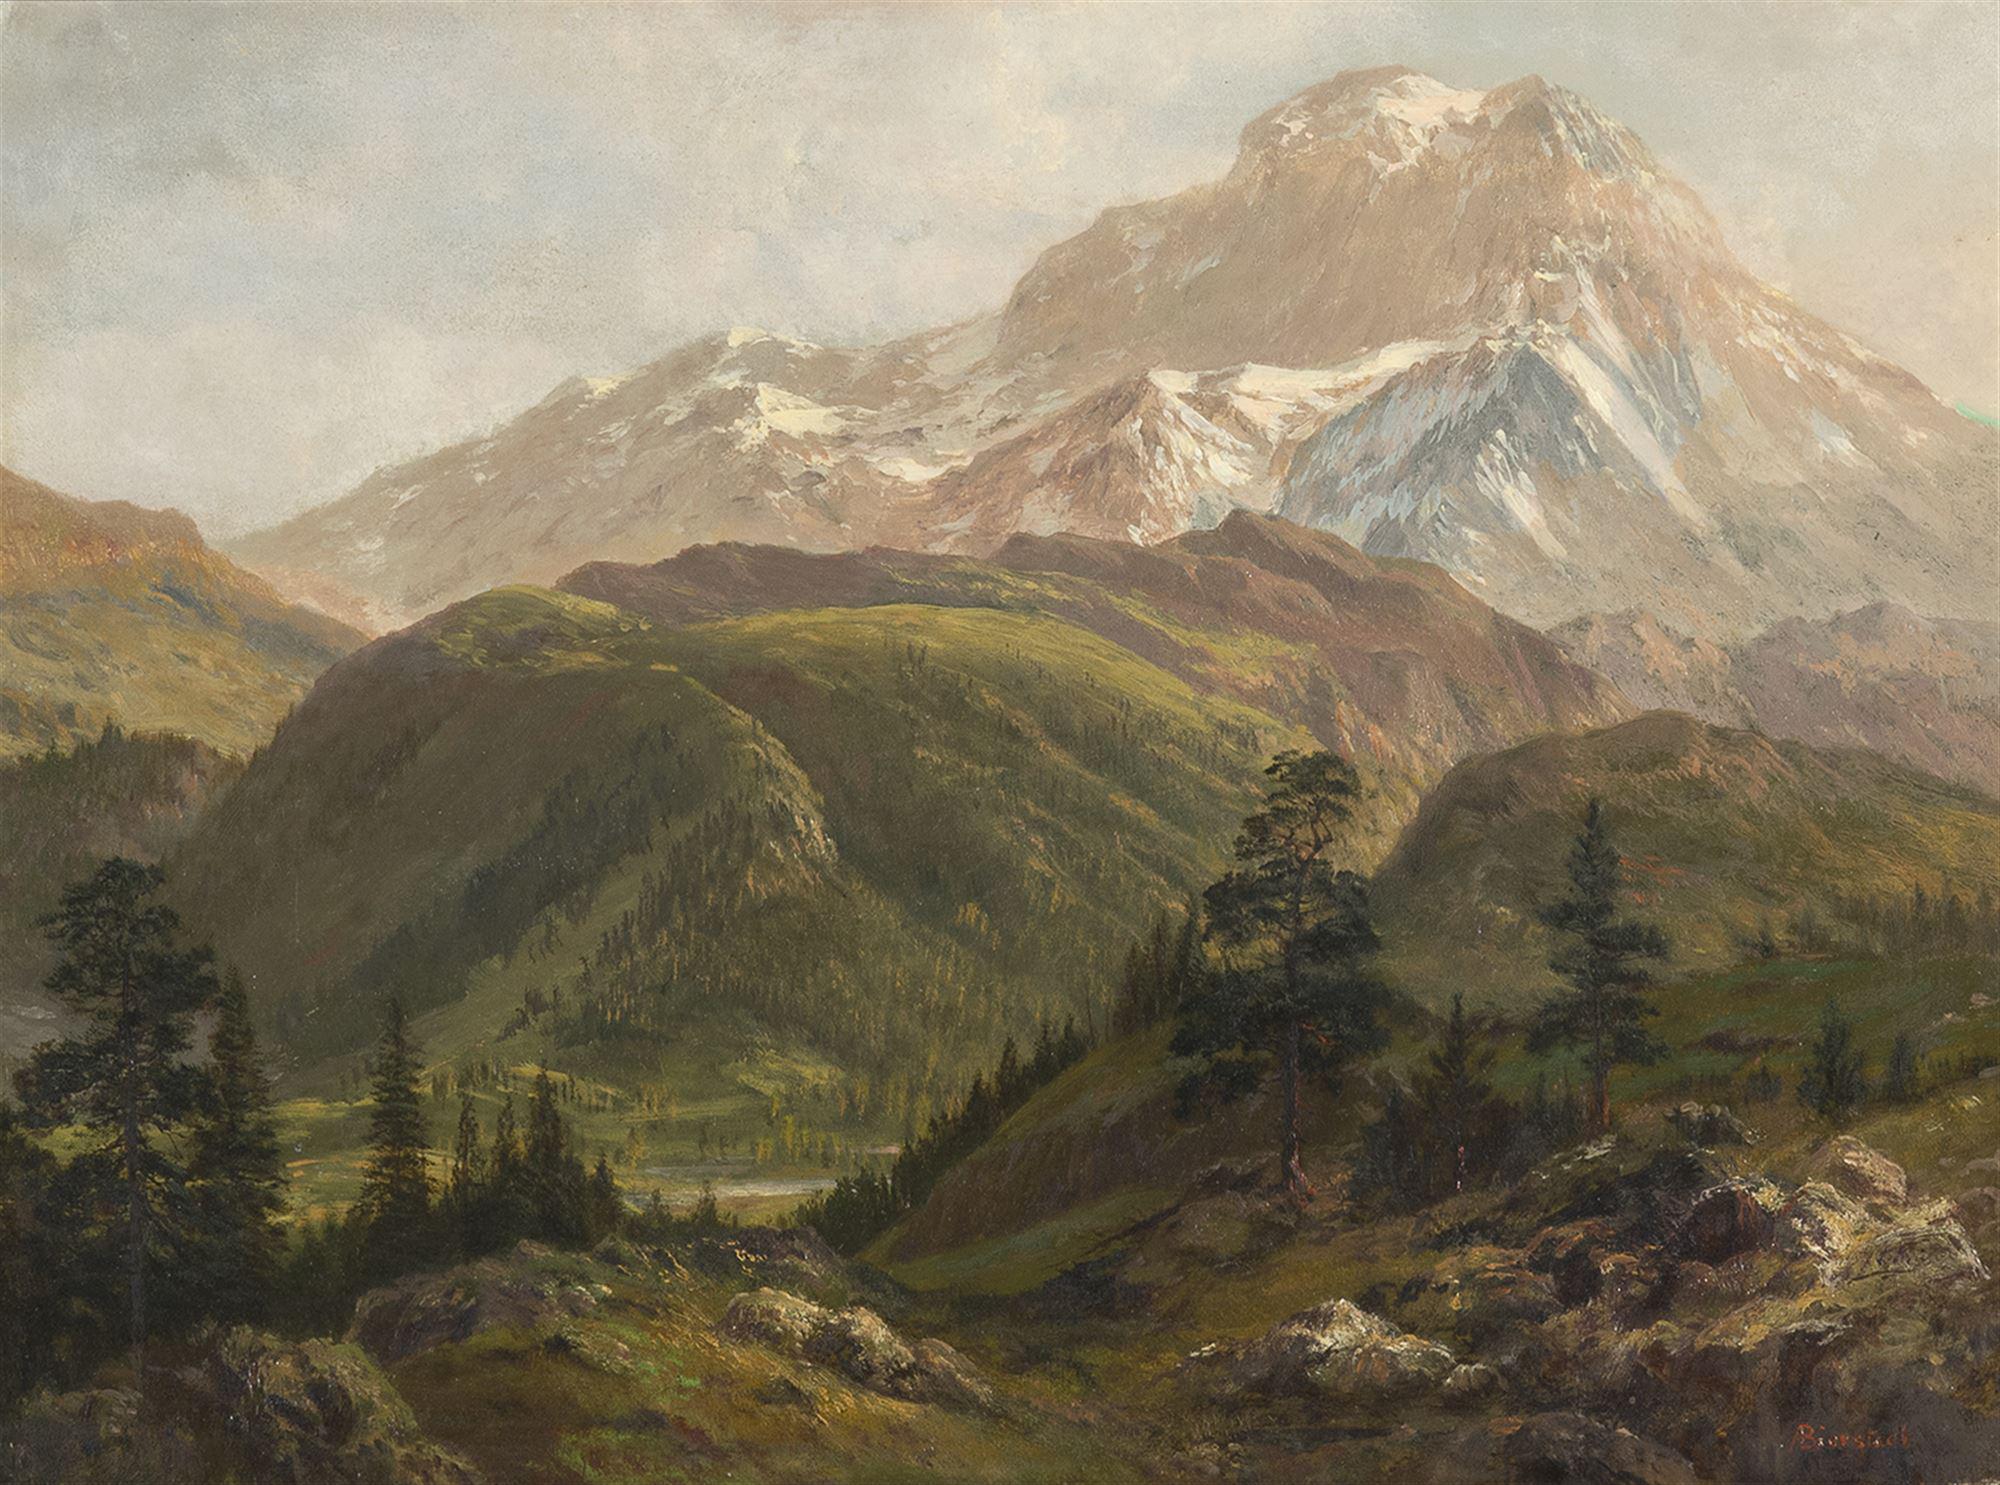 

											</b>

											<em>
												Lure of the West: Celebrating 50 Years of Gerald Peters Gallery  </em> 

											<h4>
												New York: April 29 - May 27, 2022											</h4>

		                																																<i>Albert Bierstadt, Source of the Snake River,</i>  
																																								1881, 
																																								oil on paper mounted on canvas, 
																																								14 x 19 inches 
																								
		                				